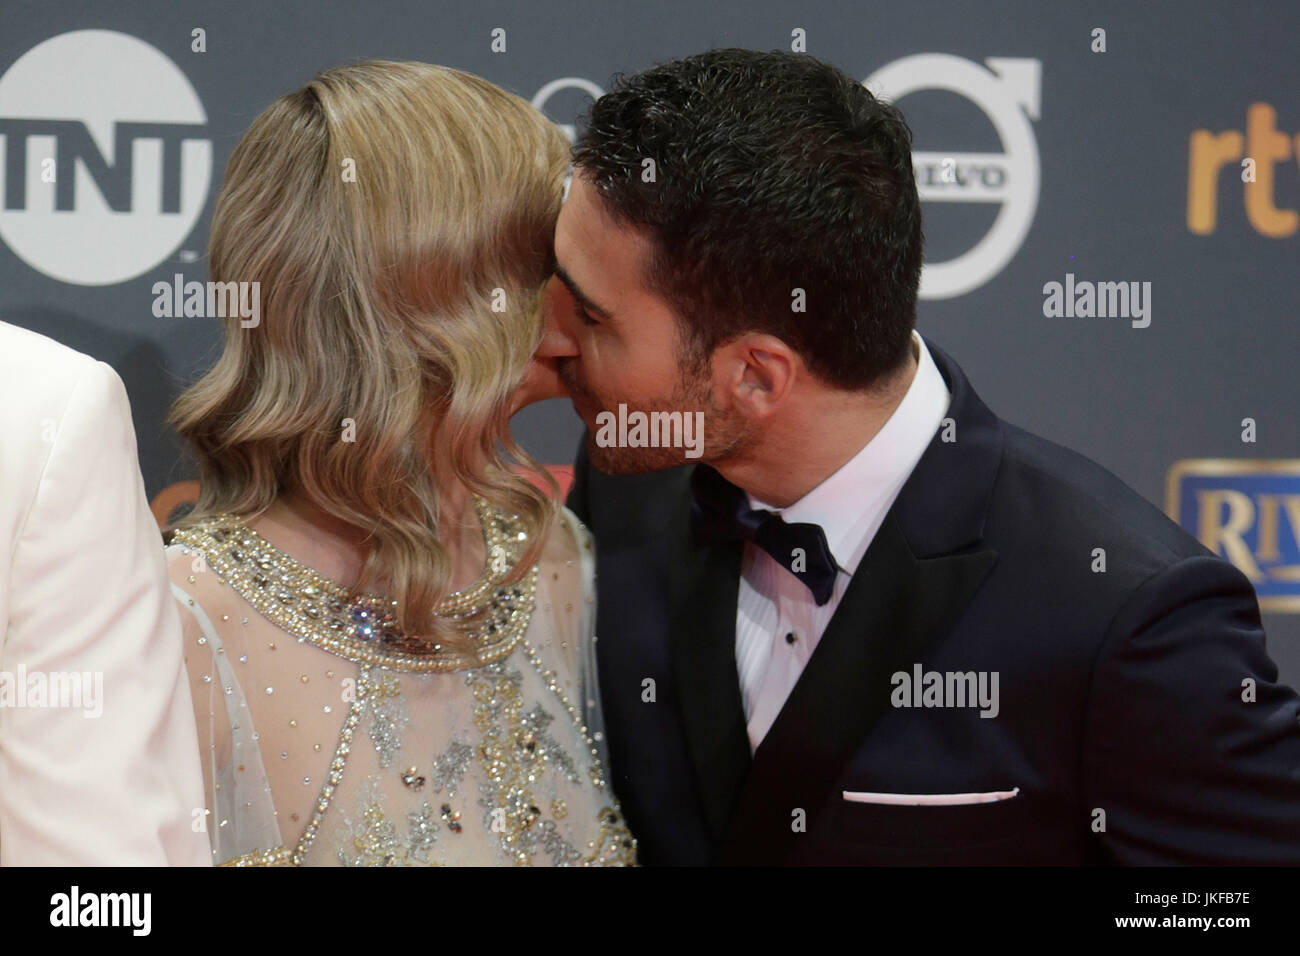 Actors Amaia Salamanca and Miguel Angel Silvestre during photocall the Platino Awards 2017 in Madrid on Saturday 22 July 2017. Stock Photo